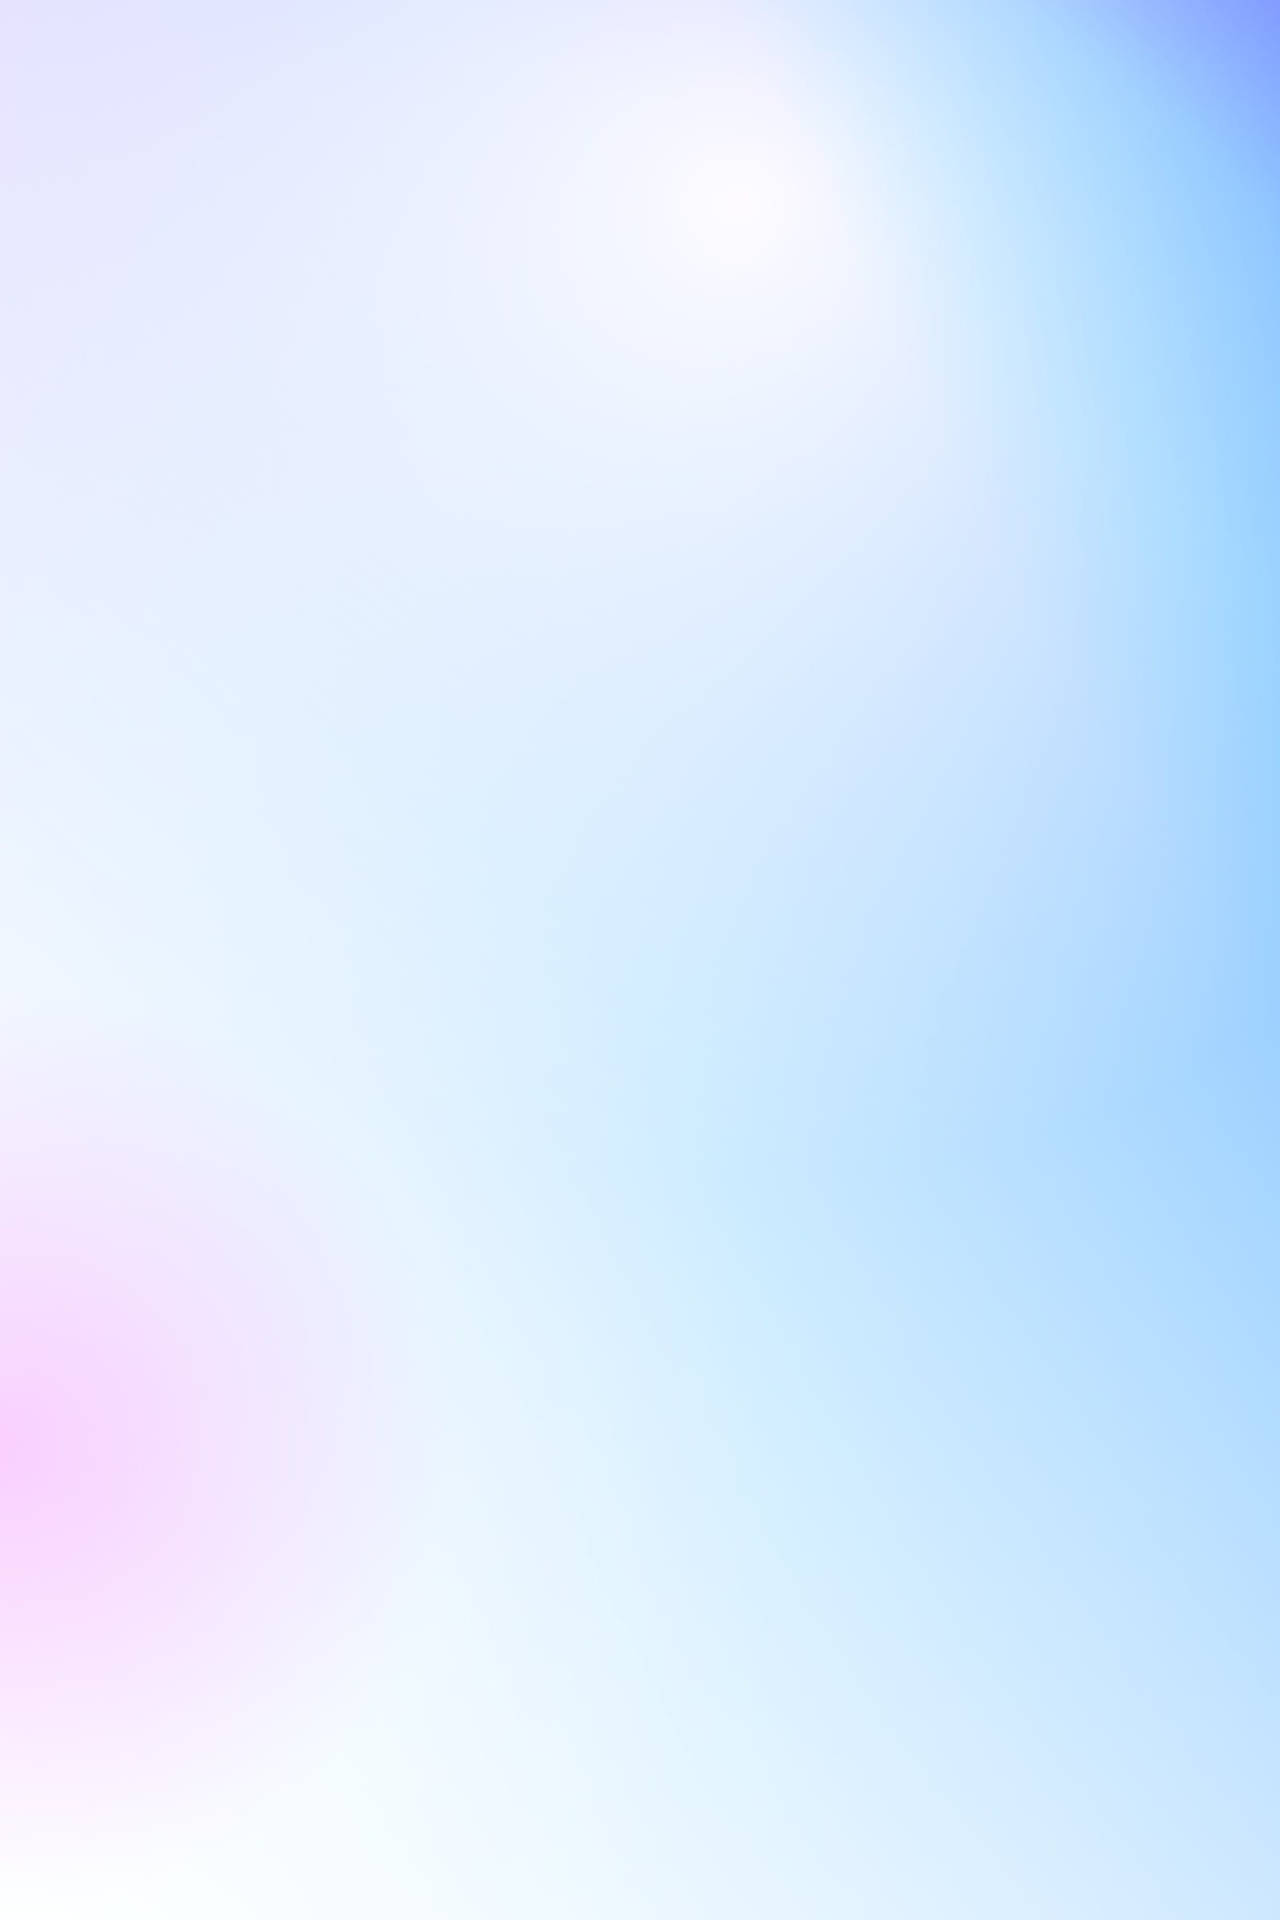 Pastel Phone Pink And Blue Gradient